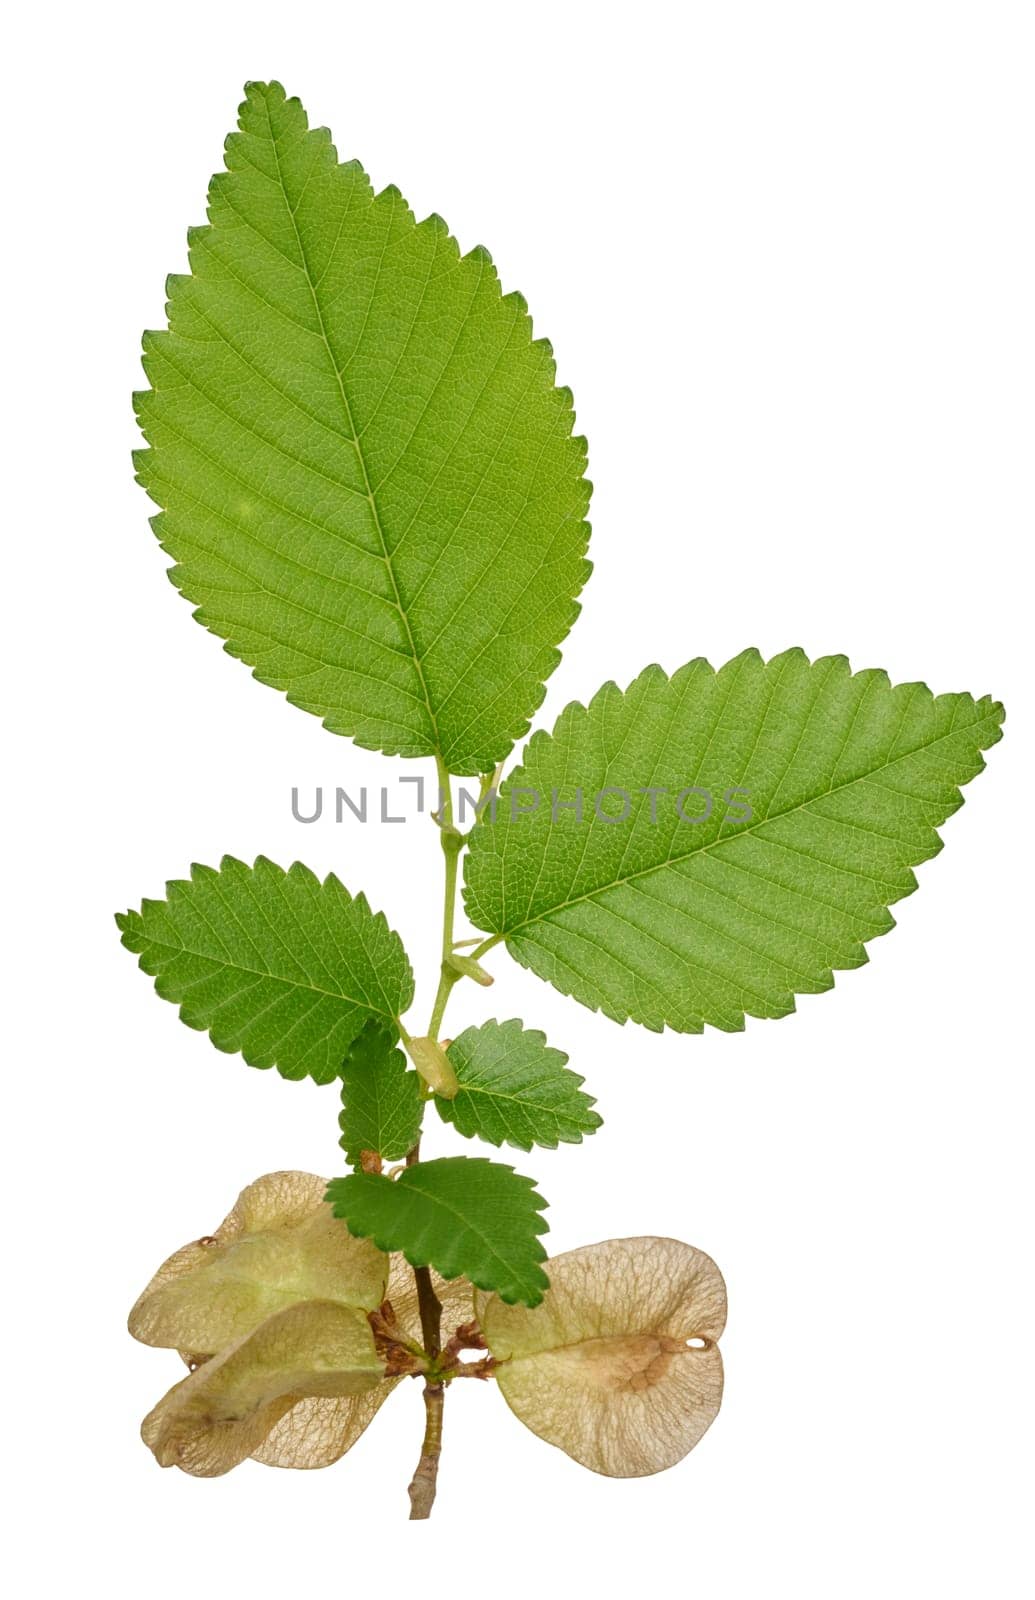 Branch with green leaves of Elm, or Ulmus, on isolated background by ndanko